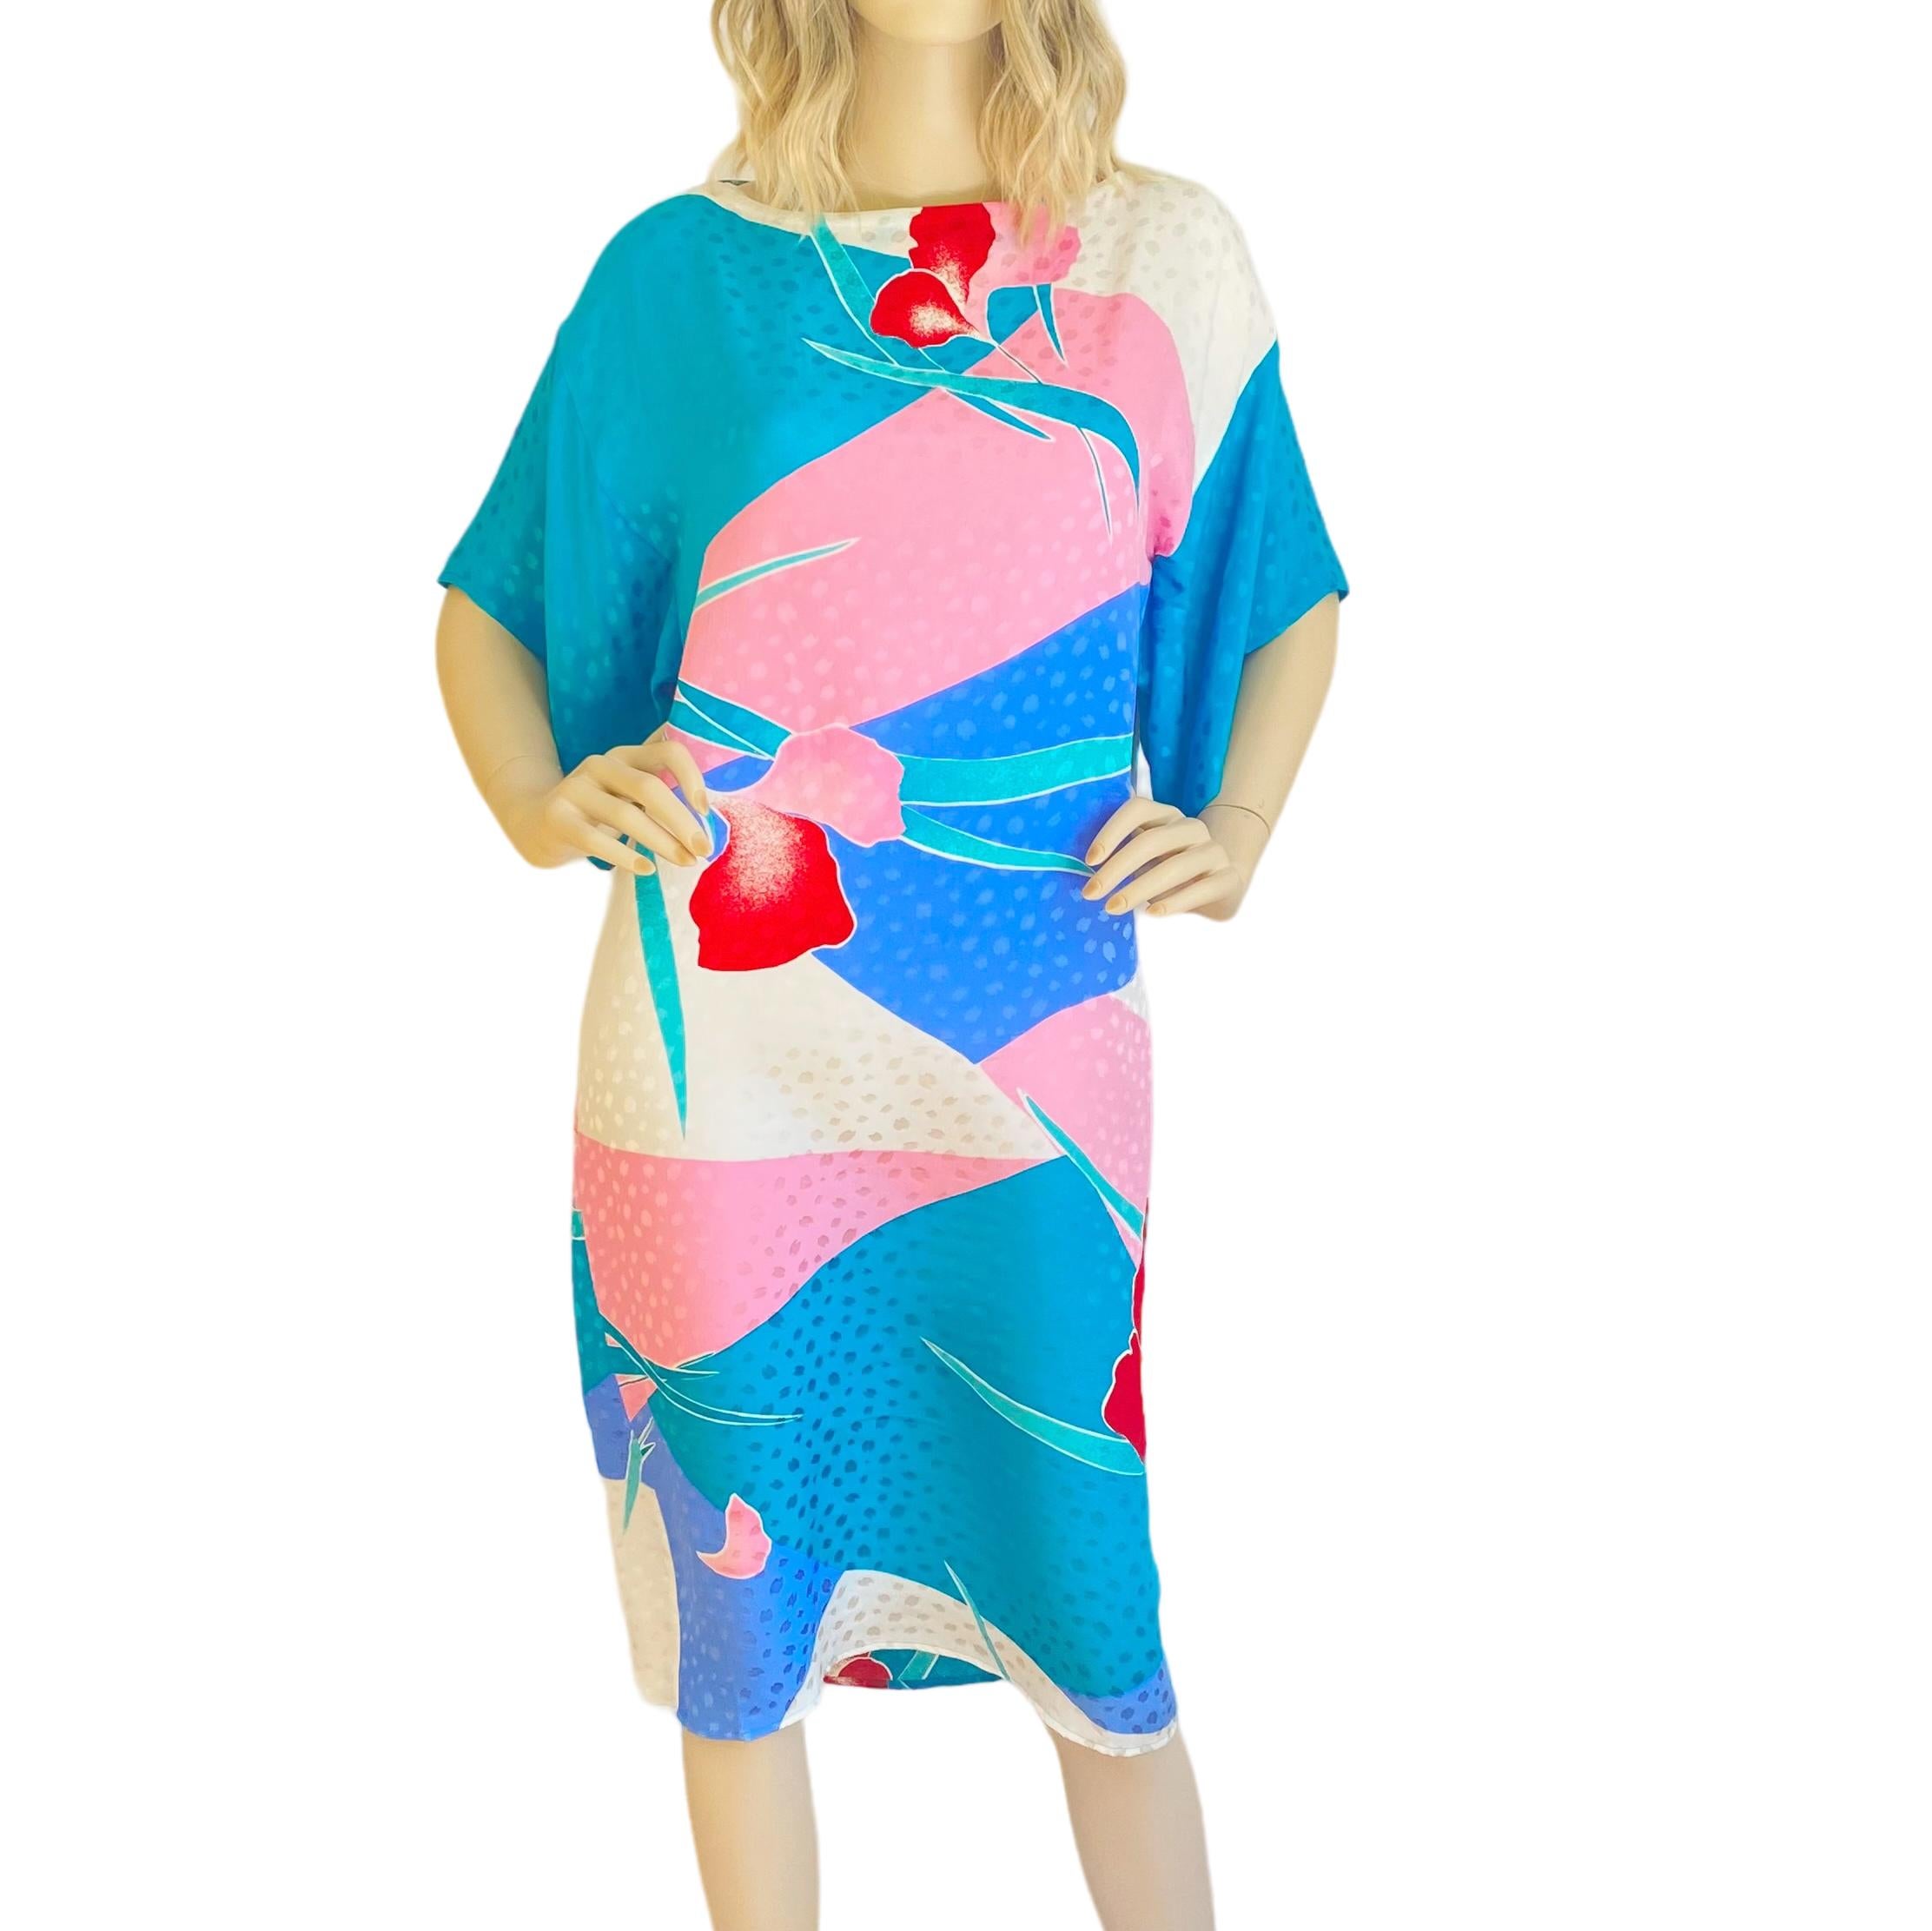 Never used. Fresh from FLORA KUNG design library archive.
Name: Flora Kung Orchid dress.
Fabric: 100% silk petal jacquard.
Print: Turquoise, pink, blue orchid on white
Circa: 1984
Condition: New with tag
 *Dress only. Elsa Peretti for Halston